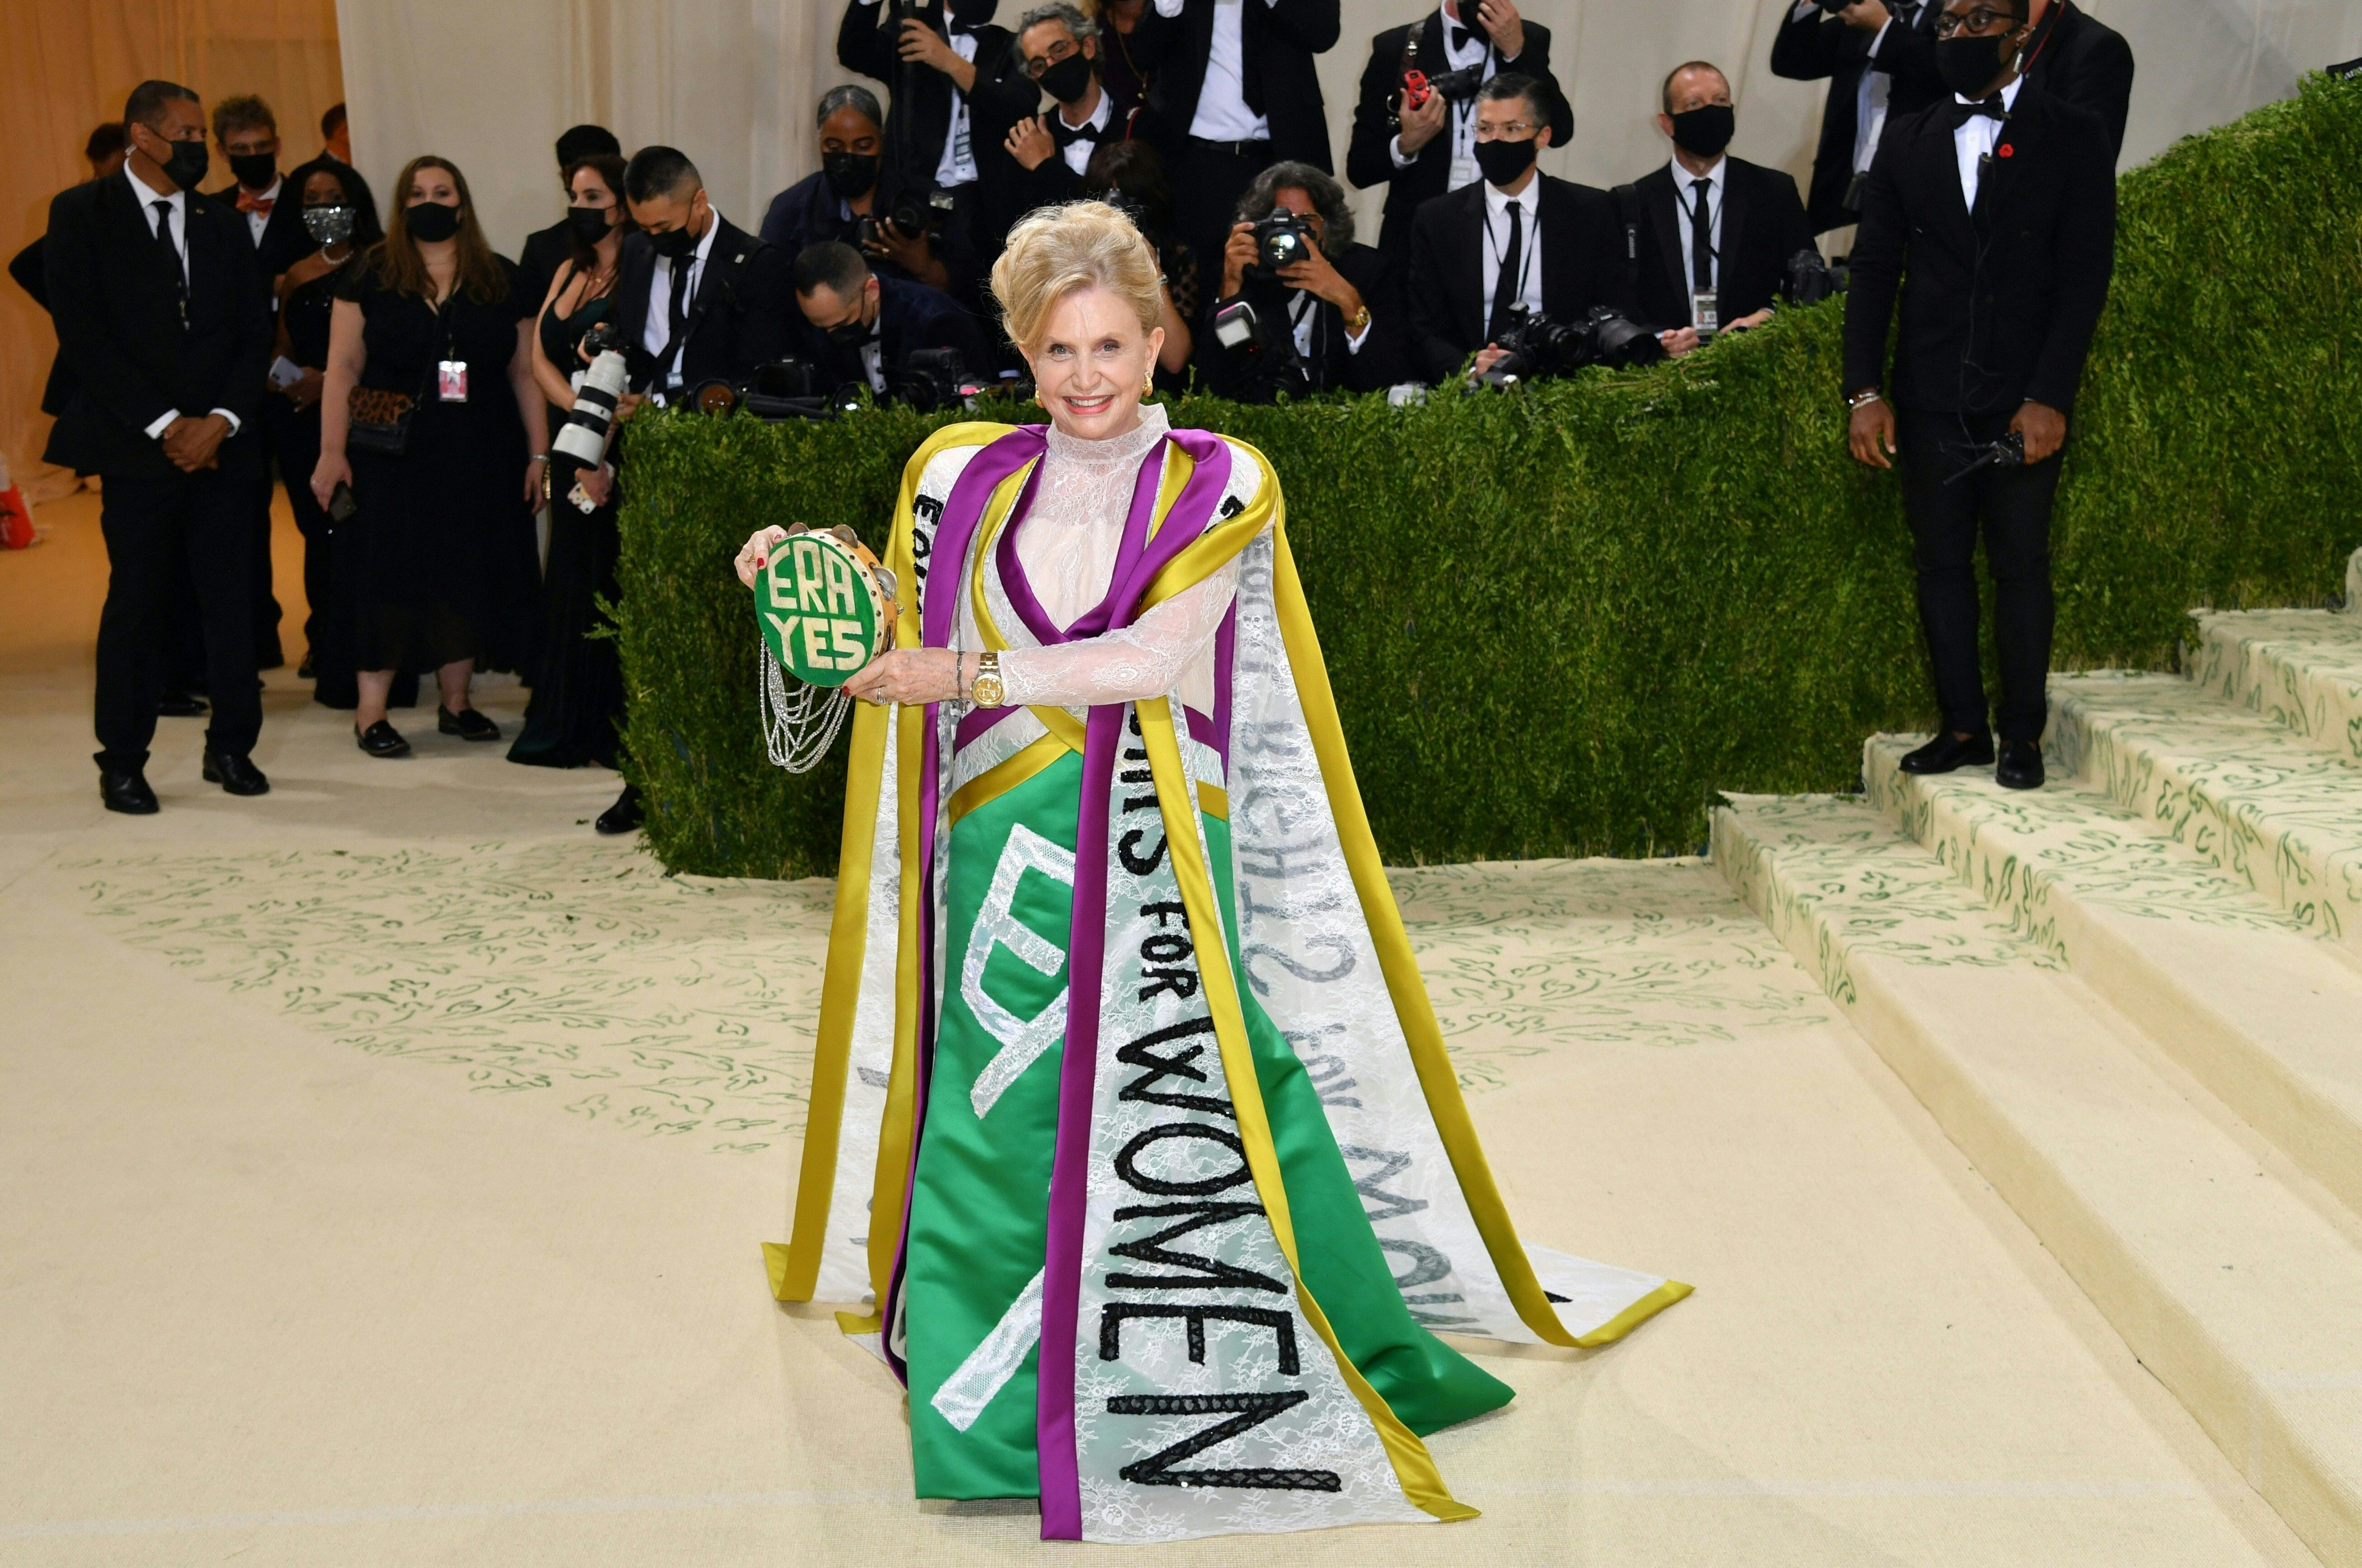 Rep. Carolyn Maloney wears a gown displaying the purple, white and gold colors of the suffrage movement, with sashes stating "equal rights for women" at NYC's Met Gala on Monday.